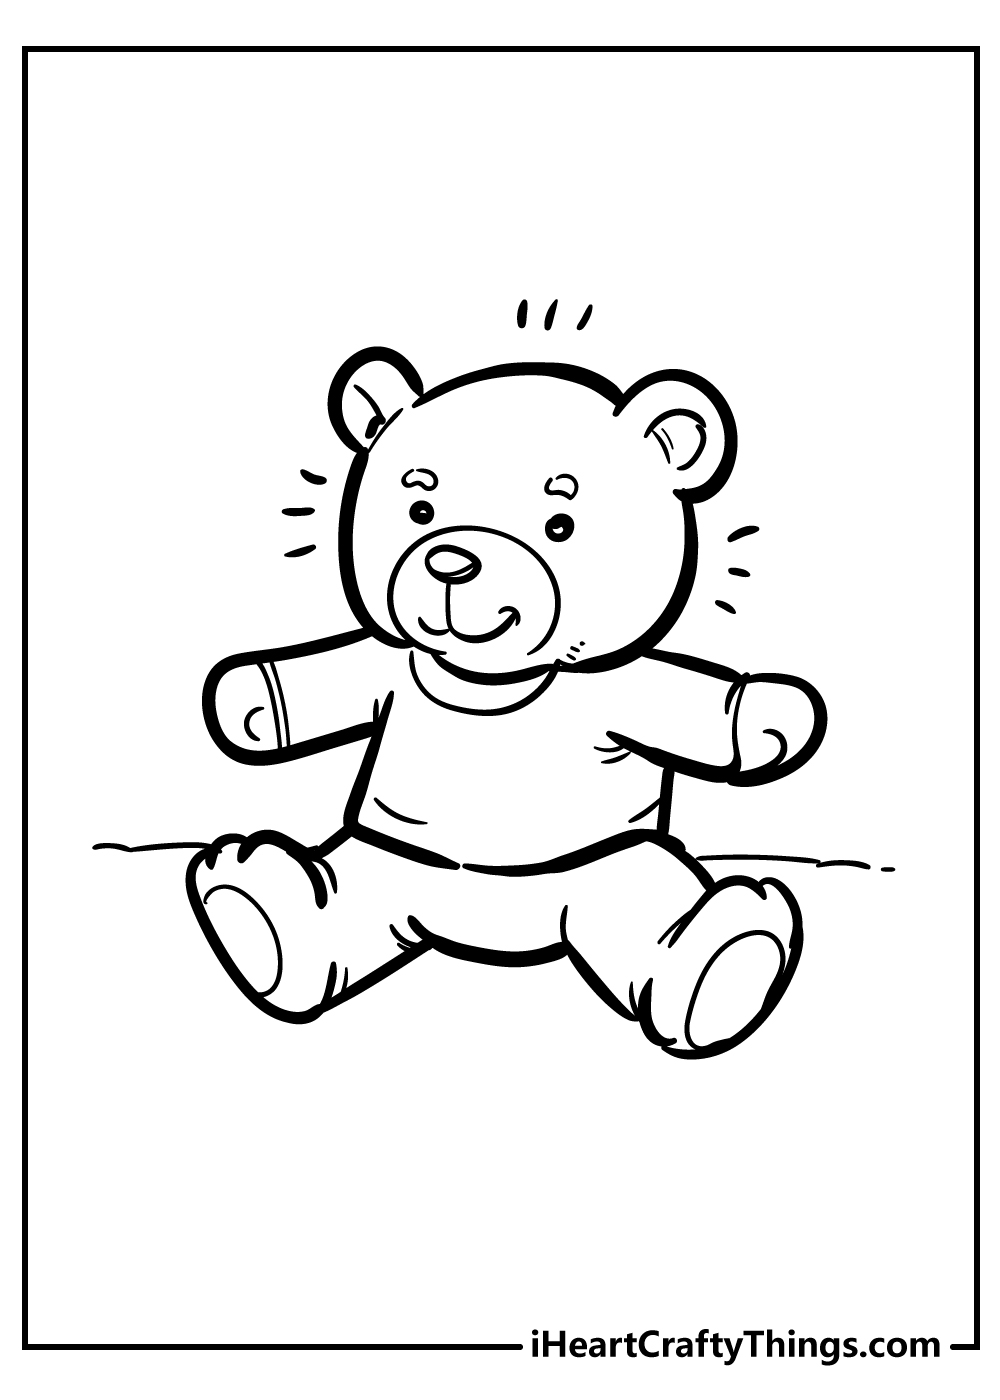 Teddy Bear Easy Coloring Pages